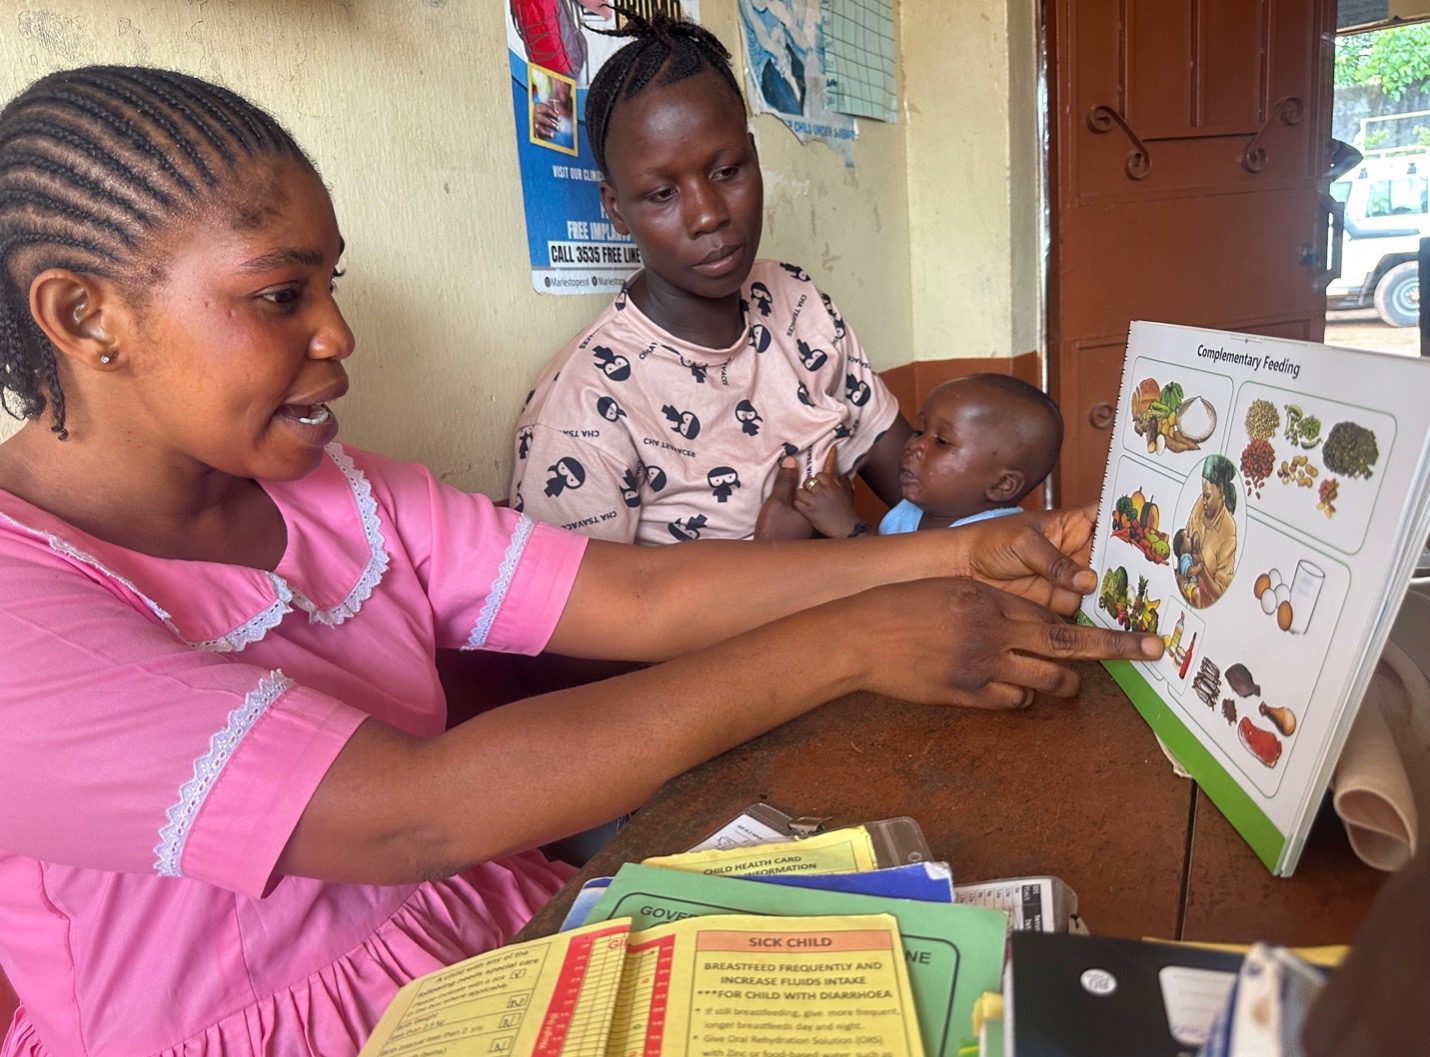 A Sierra Leonean nurse sits next to a mother holding a baby. The nurse points to a chart about complementary feeding.